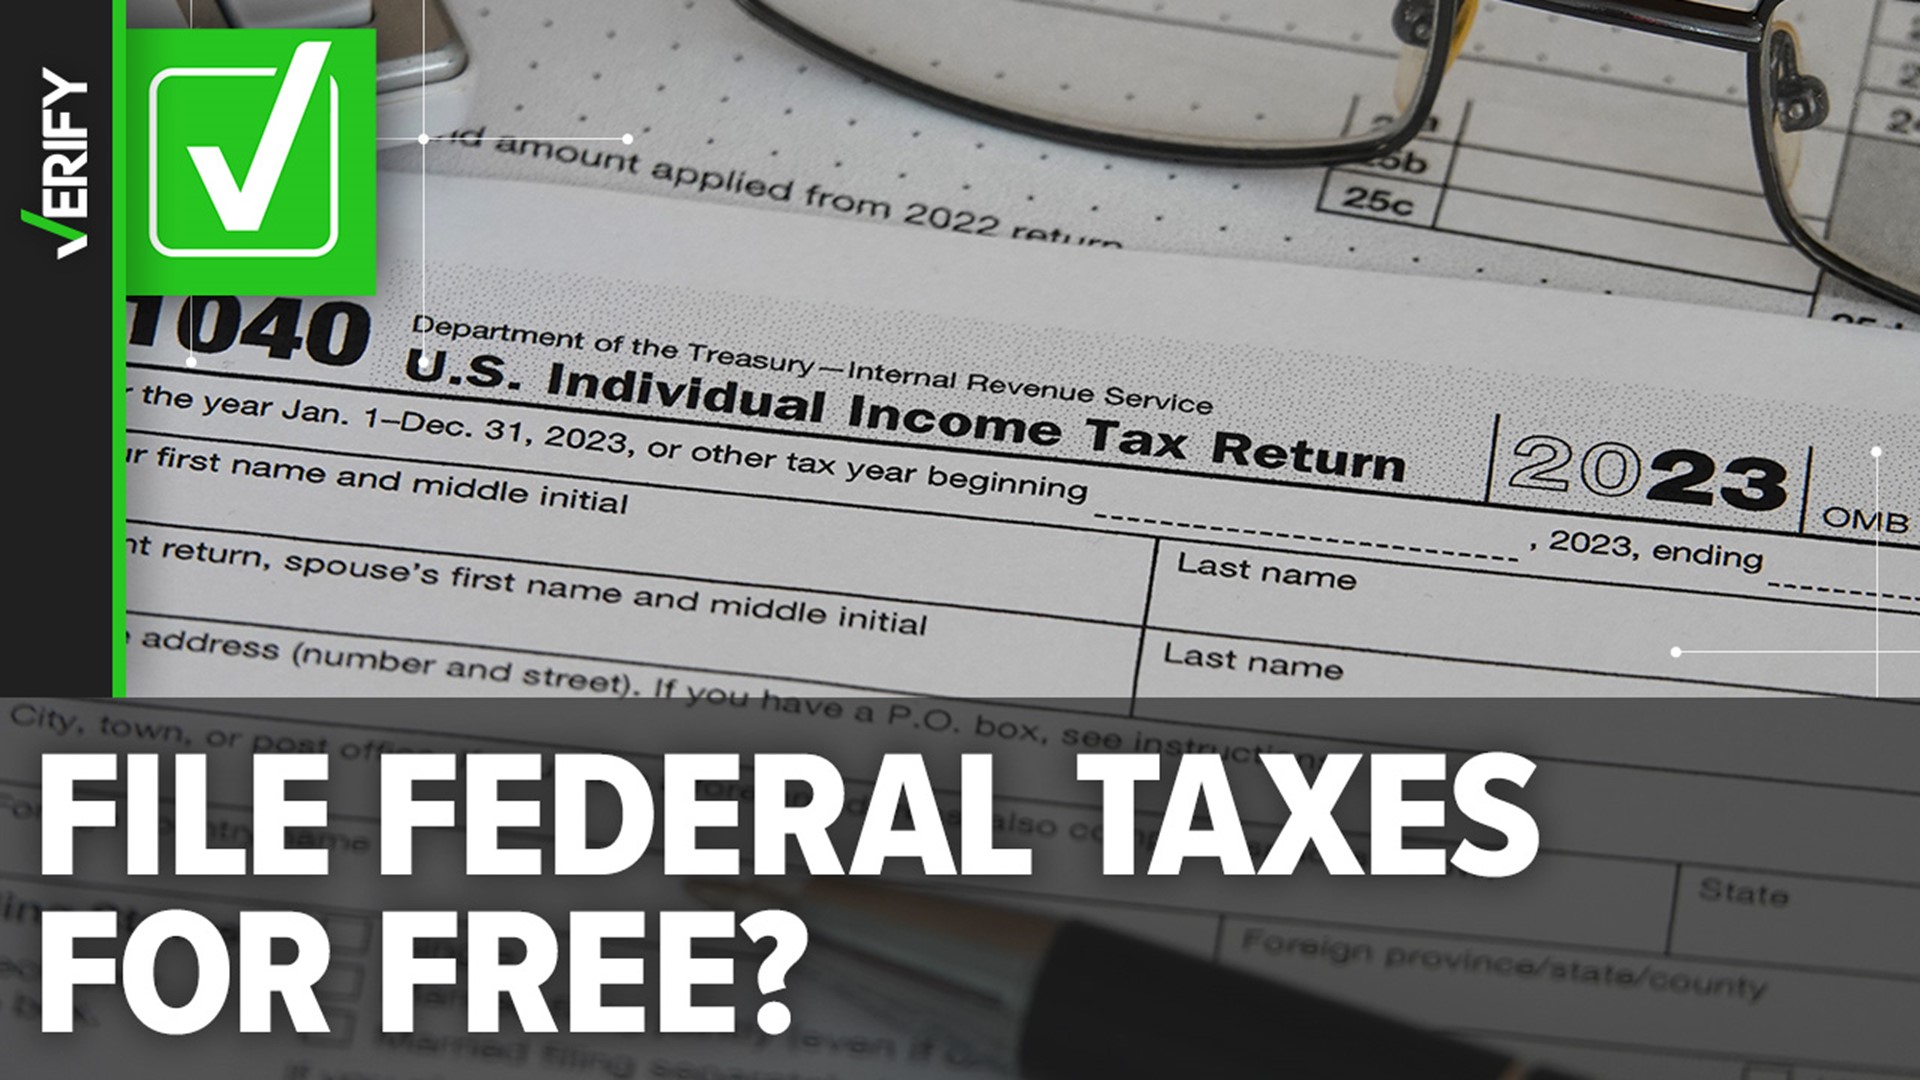 There are several options you can use to file your federal taxes, and sometimes your state taxes, for free.